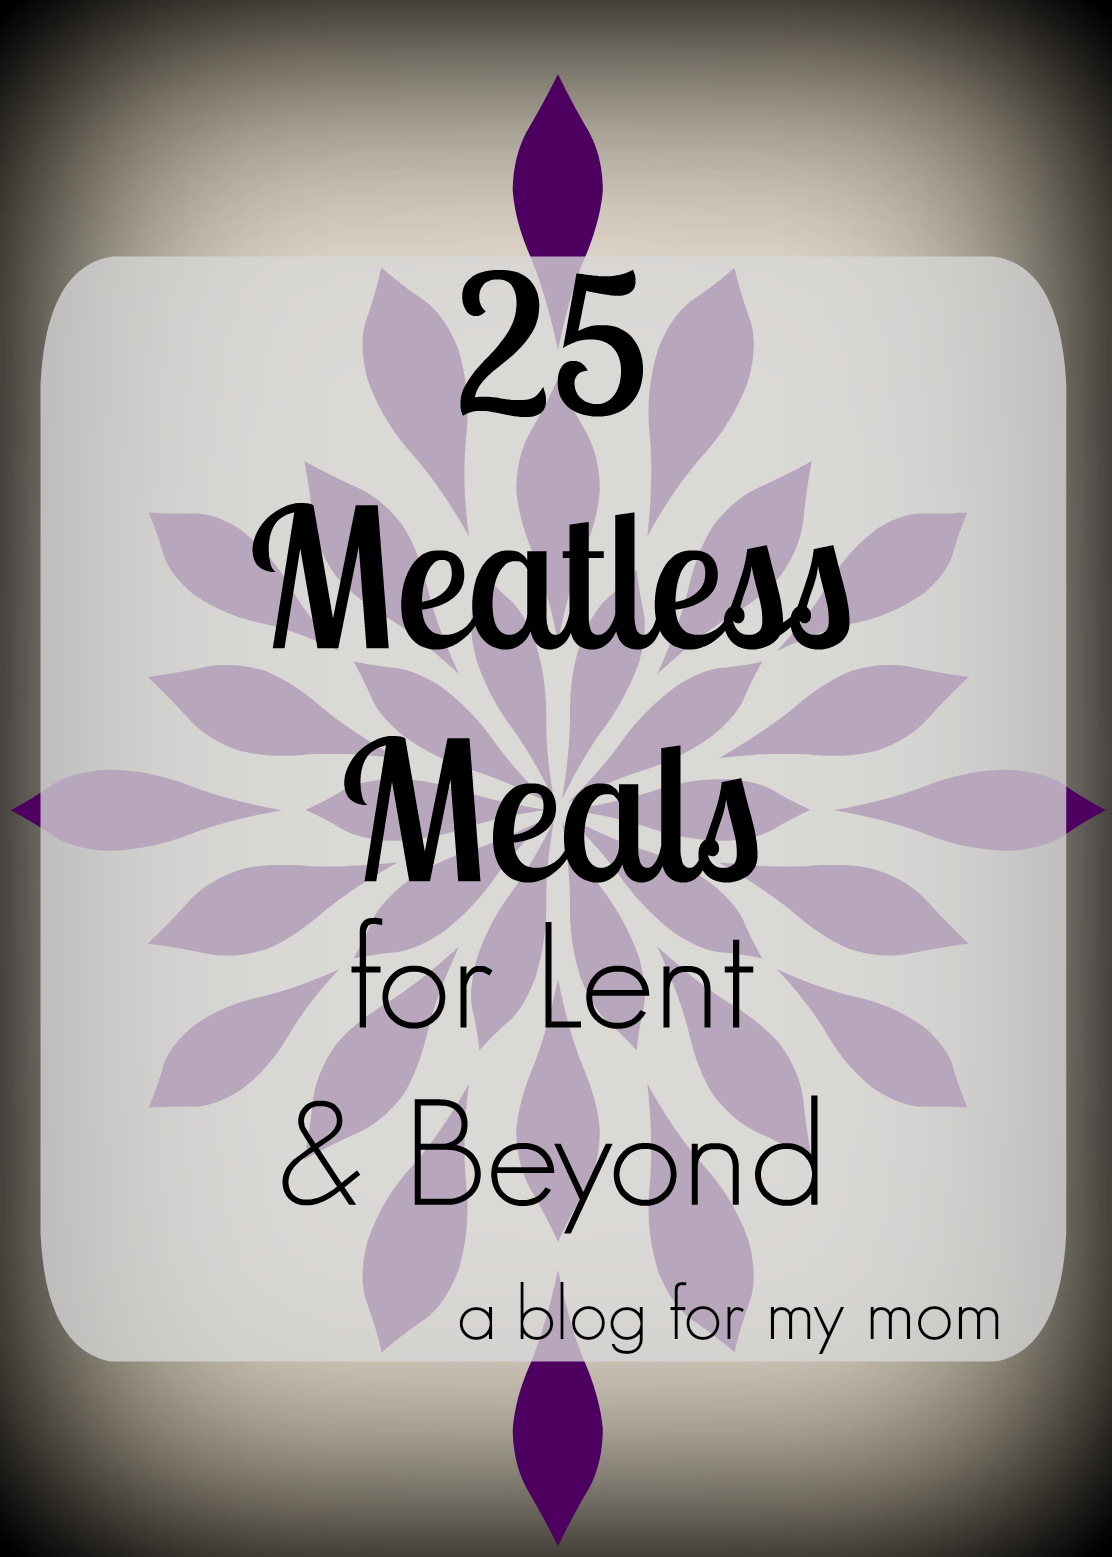 A blog for my mom: 25 Meatless Meals for Lent